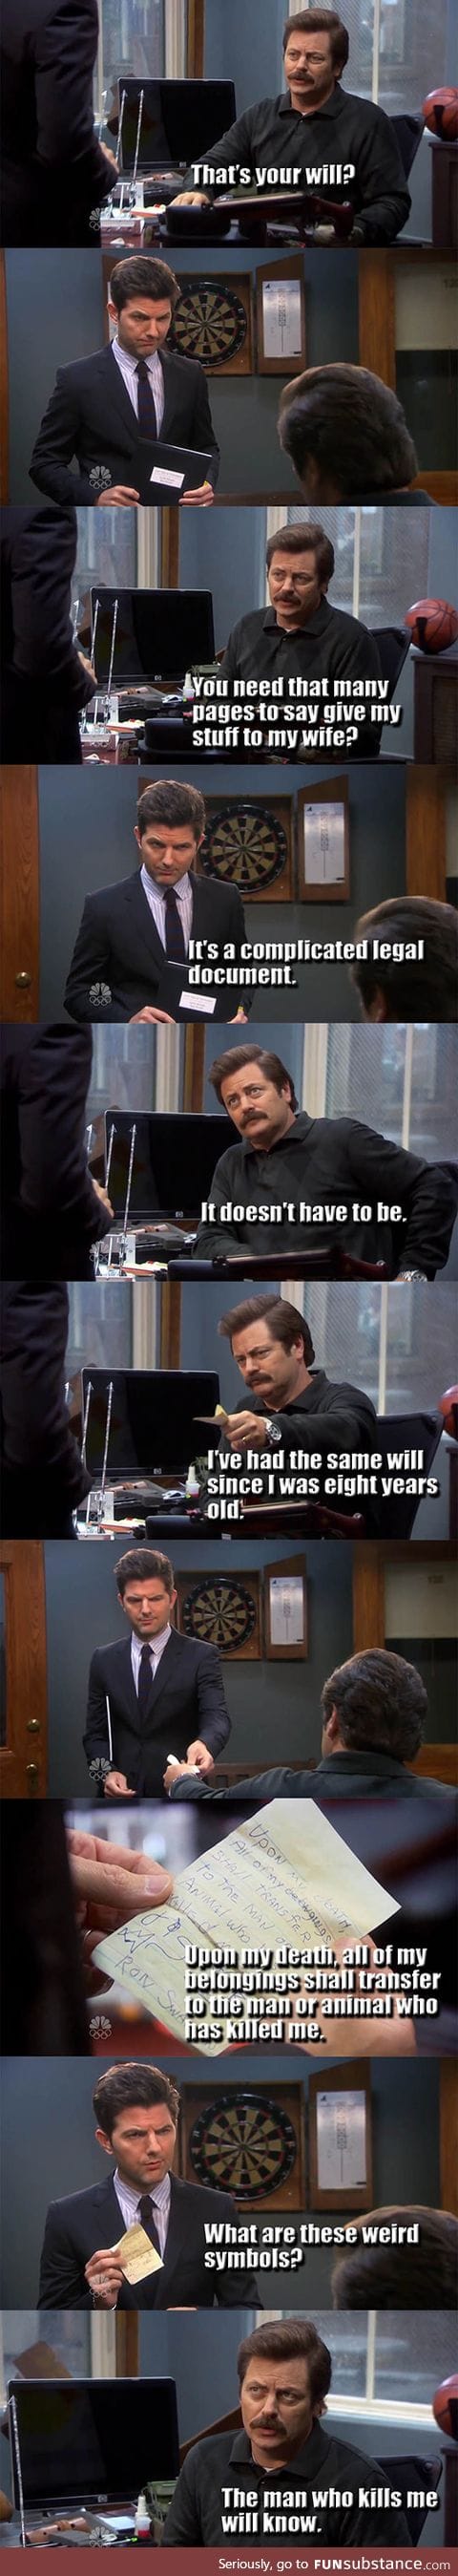 Ron Swanson's Will Is Epic